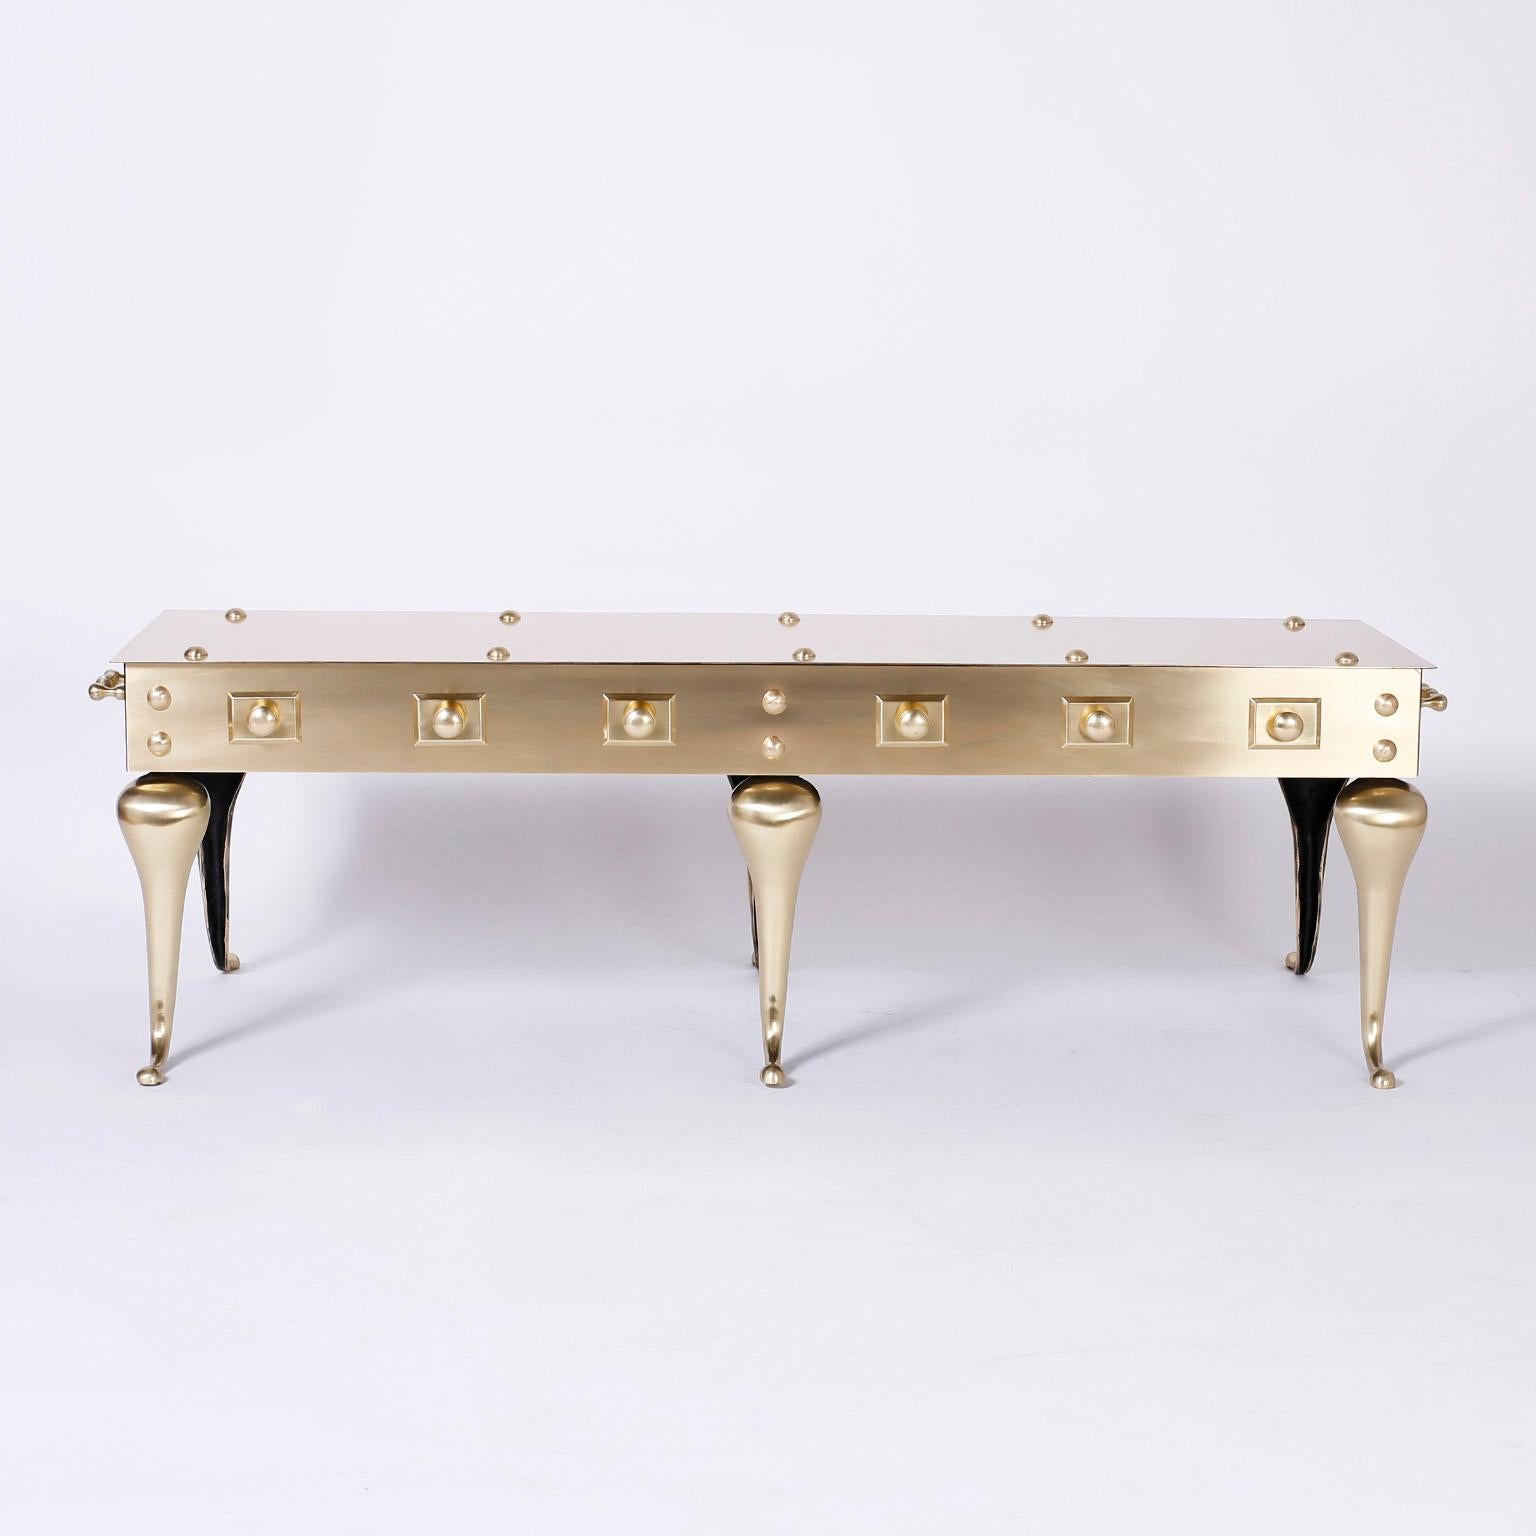 Exciting brass coffee table that is a hip midcentury version of a Queen Anne hearth stand with six distinctive legs, side handles, and decorative faux rivets. Hand polished and lacquered for easy care.